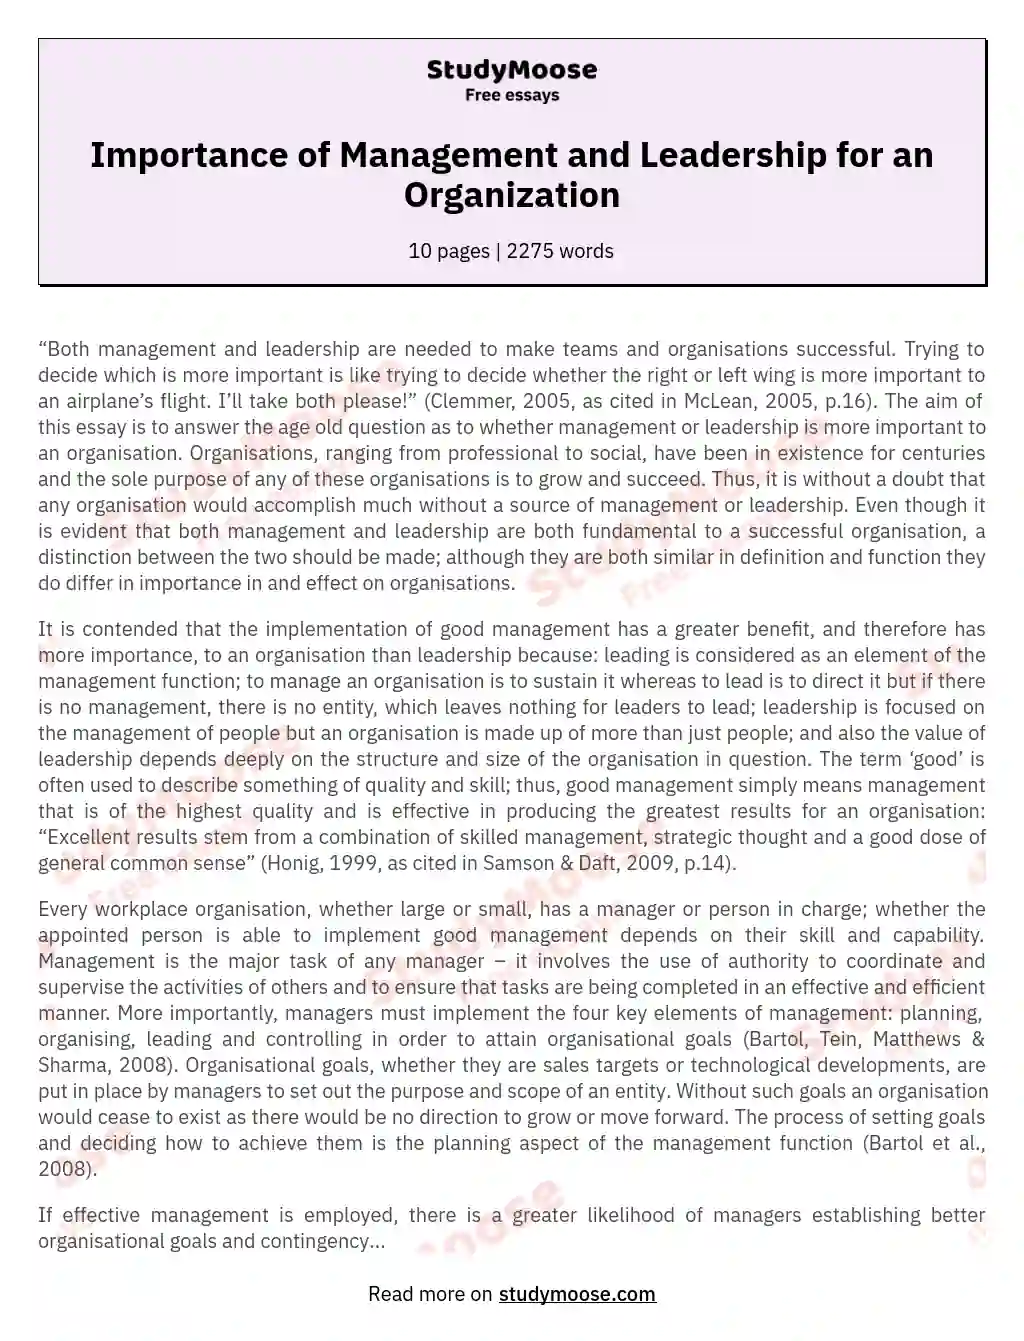 Importance of Management and Leadership for an Organization essay